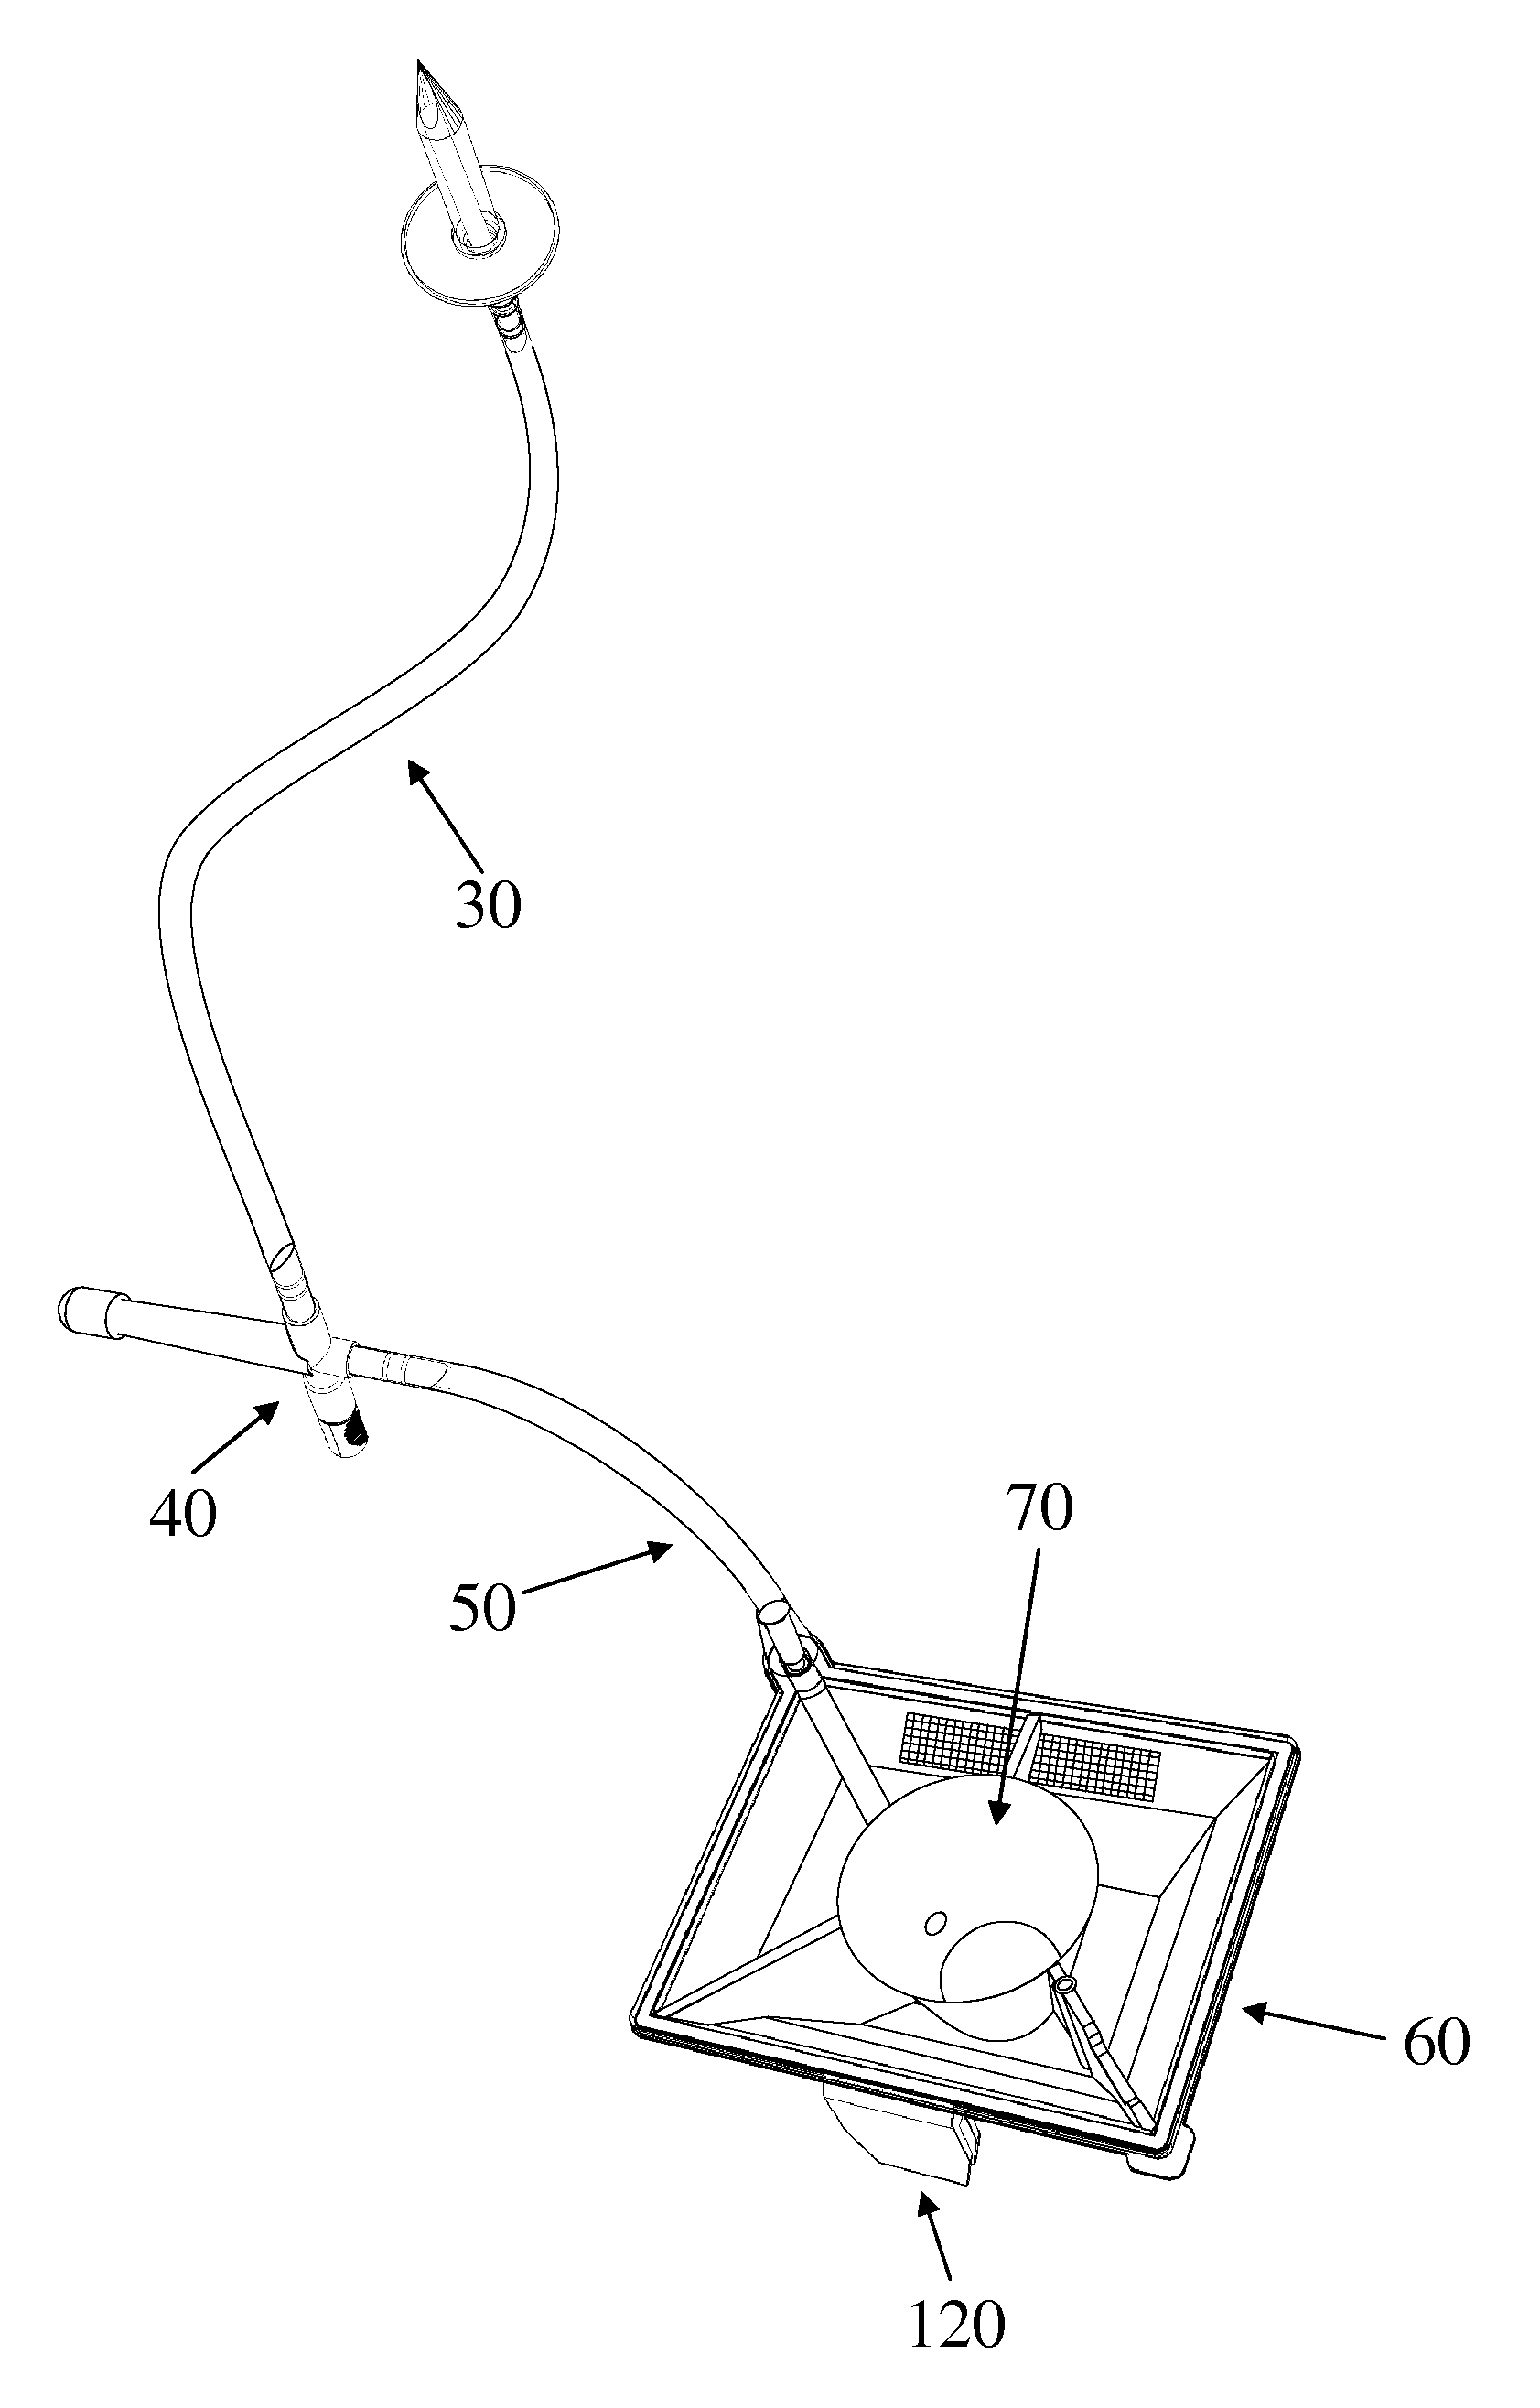 Collector device for cattle embryos